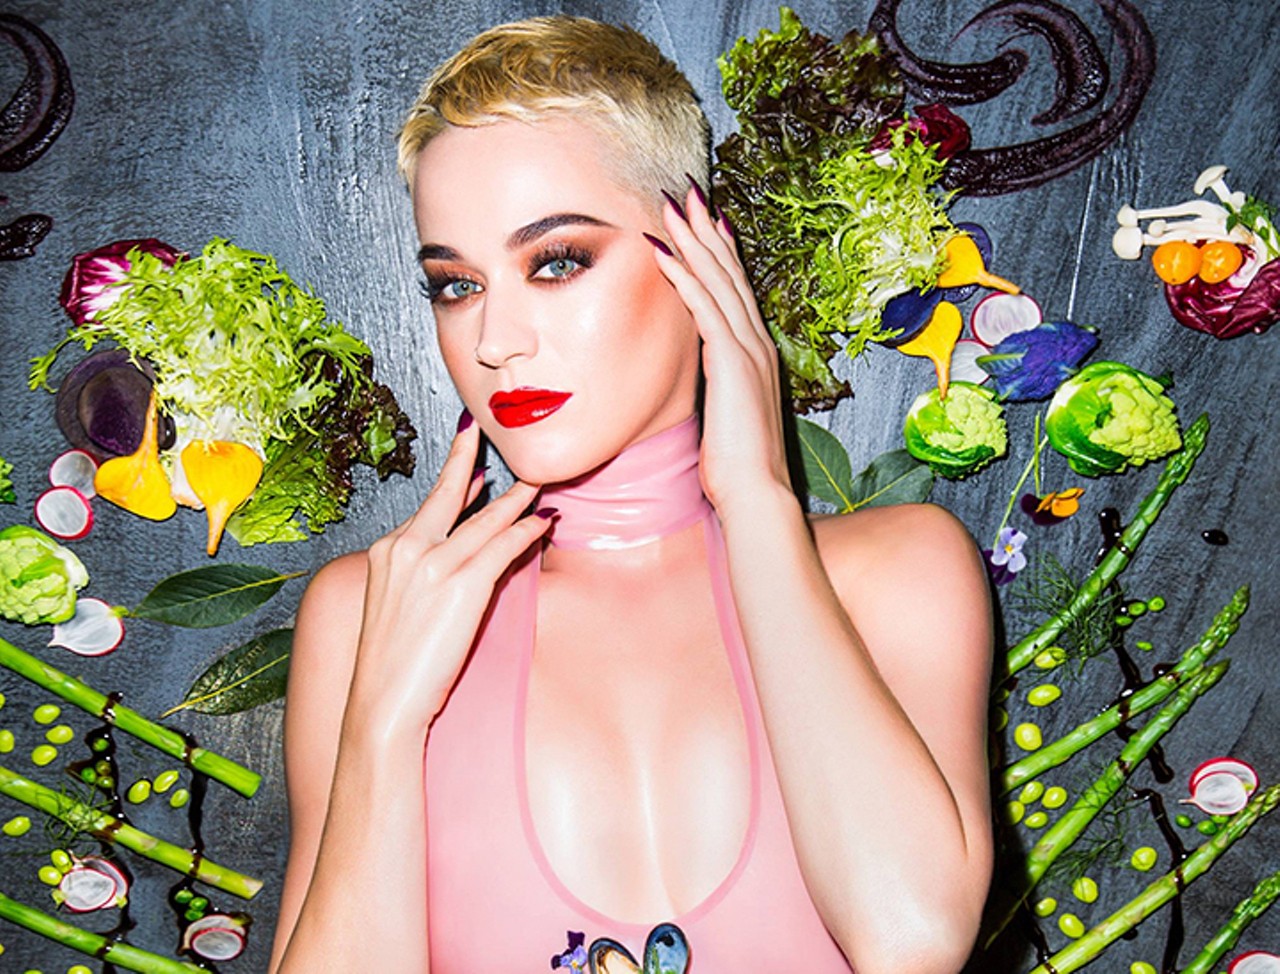 Sunday, Dec. 17Katy Perry at Amway Center